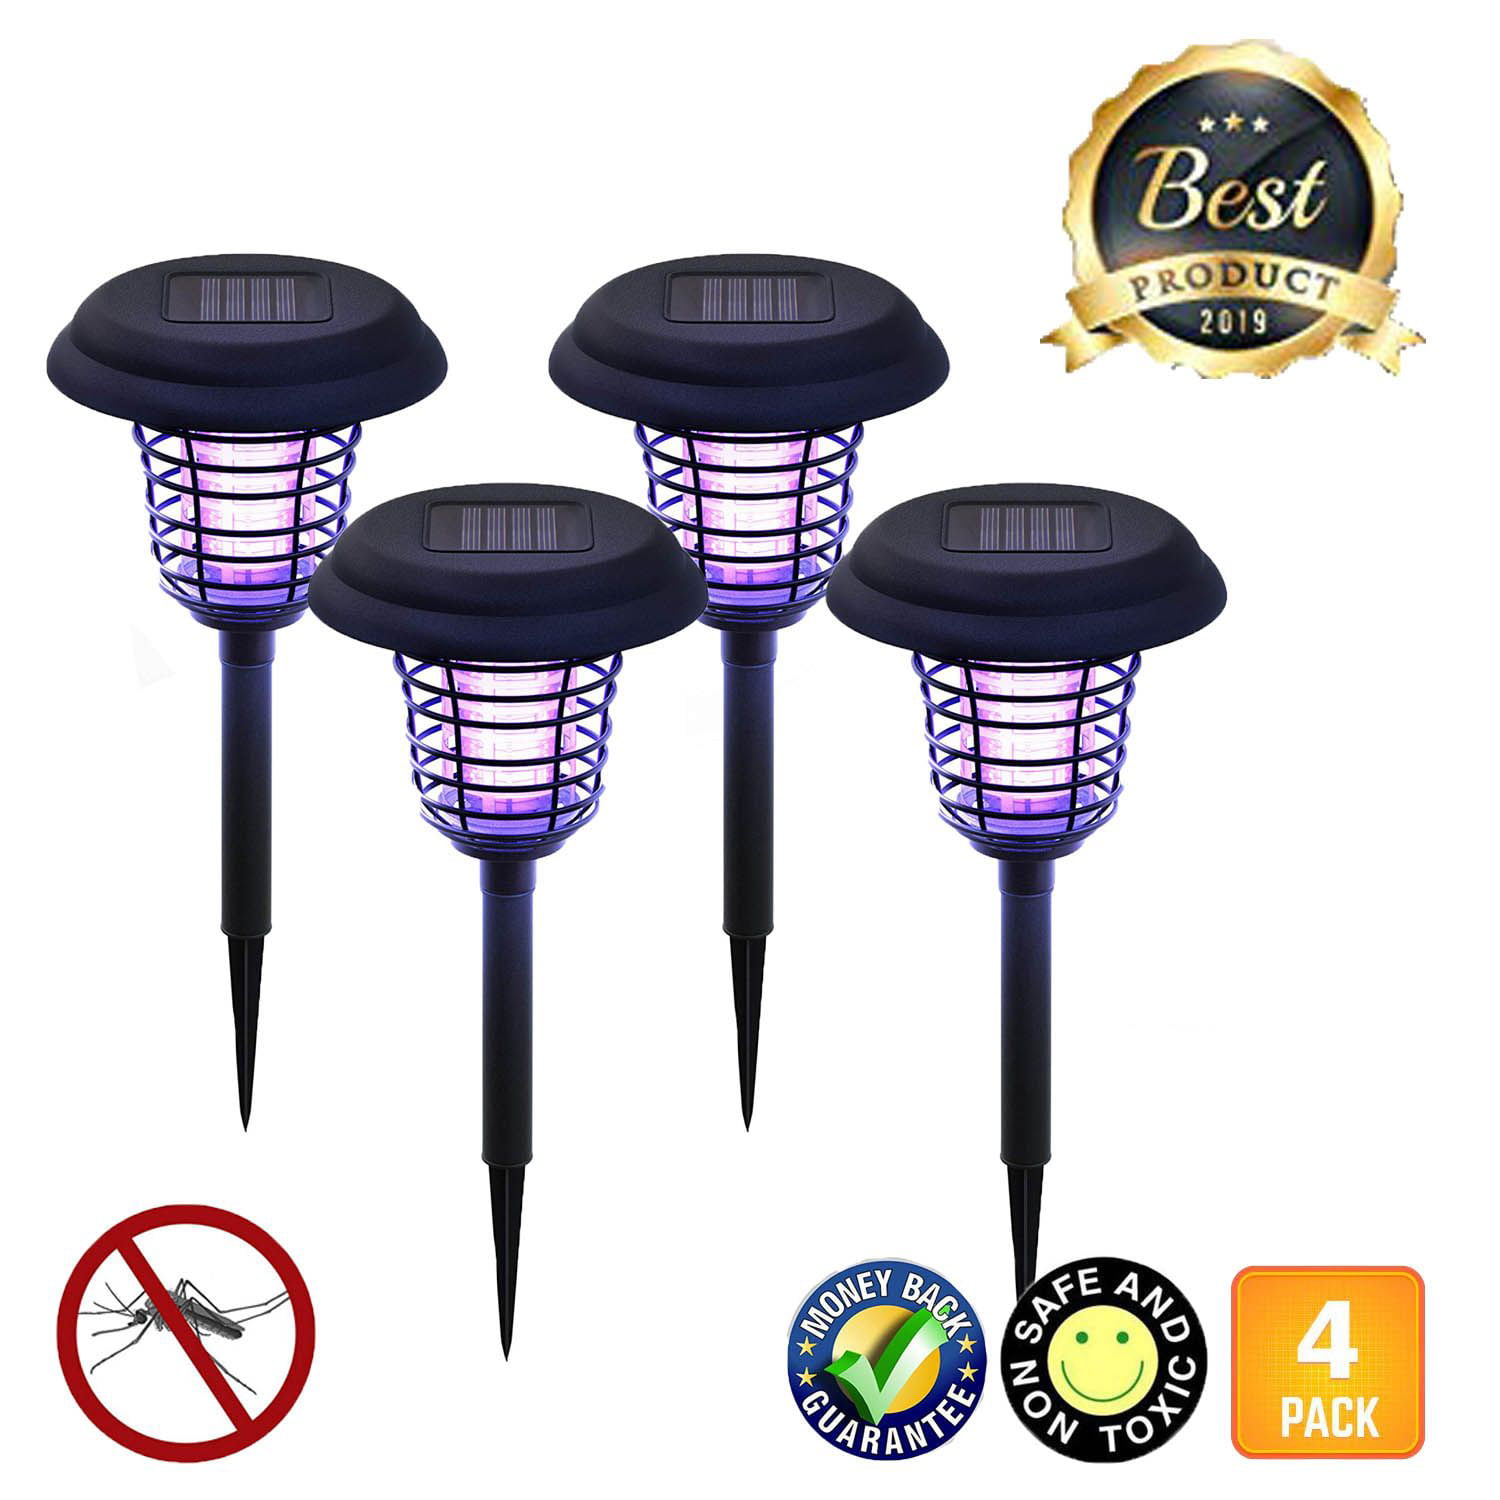 Best Solar Powered Bug Zappers